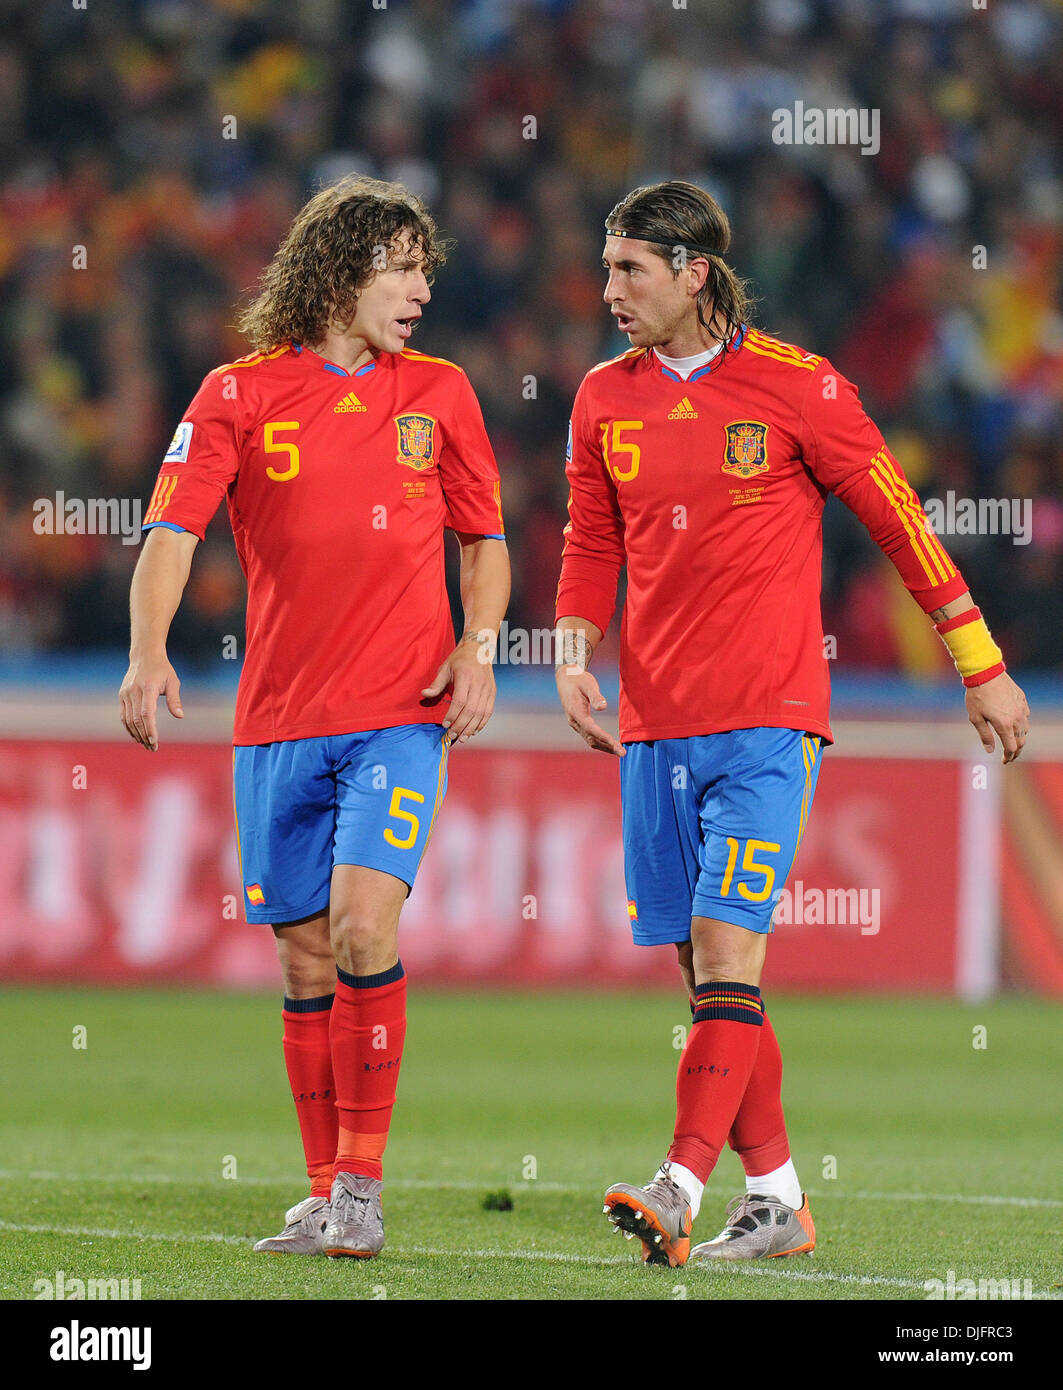 June 22, 2010 - Carles Puyol of Spain speaks with Sergio Ramos during the 2010 FIFA World Cup soccer match between Spain and Honduras at Ellis Park Stadium on June 21, 2010 in Johannesburg, South Africa. (Credit Image: © Luca Ghidoni/ZUMApress.com) Stock Photo